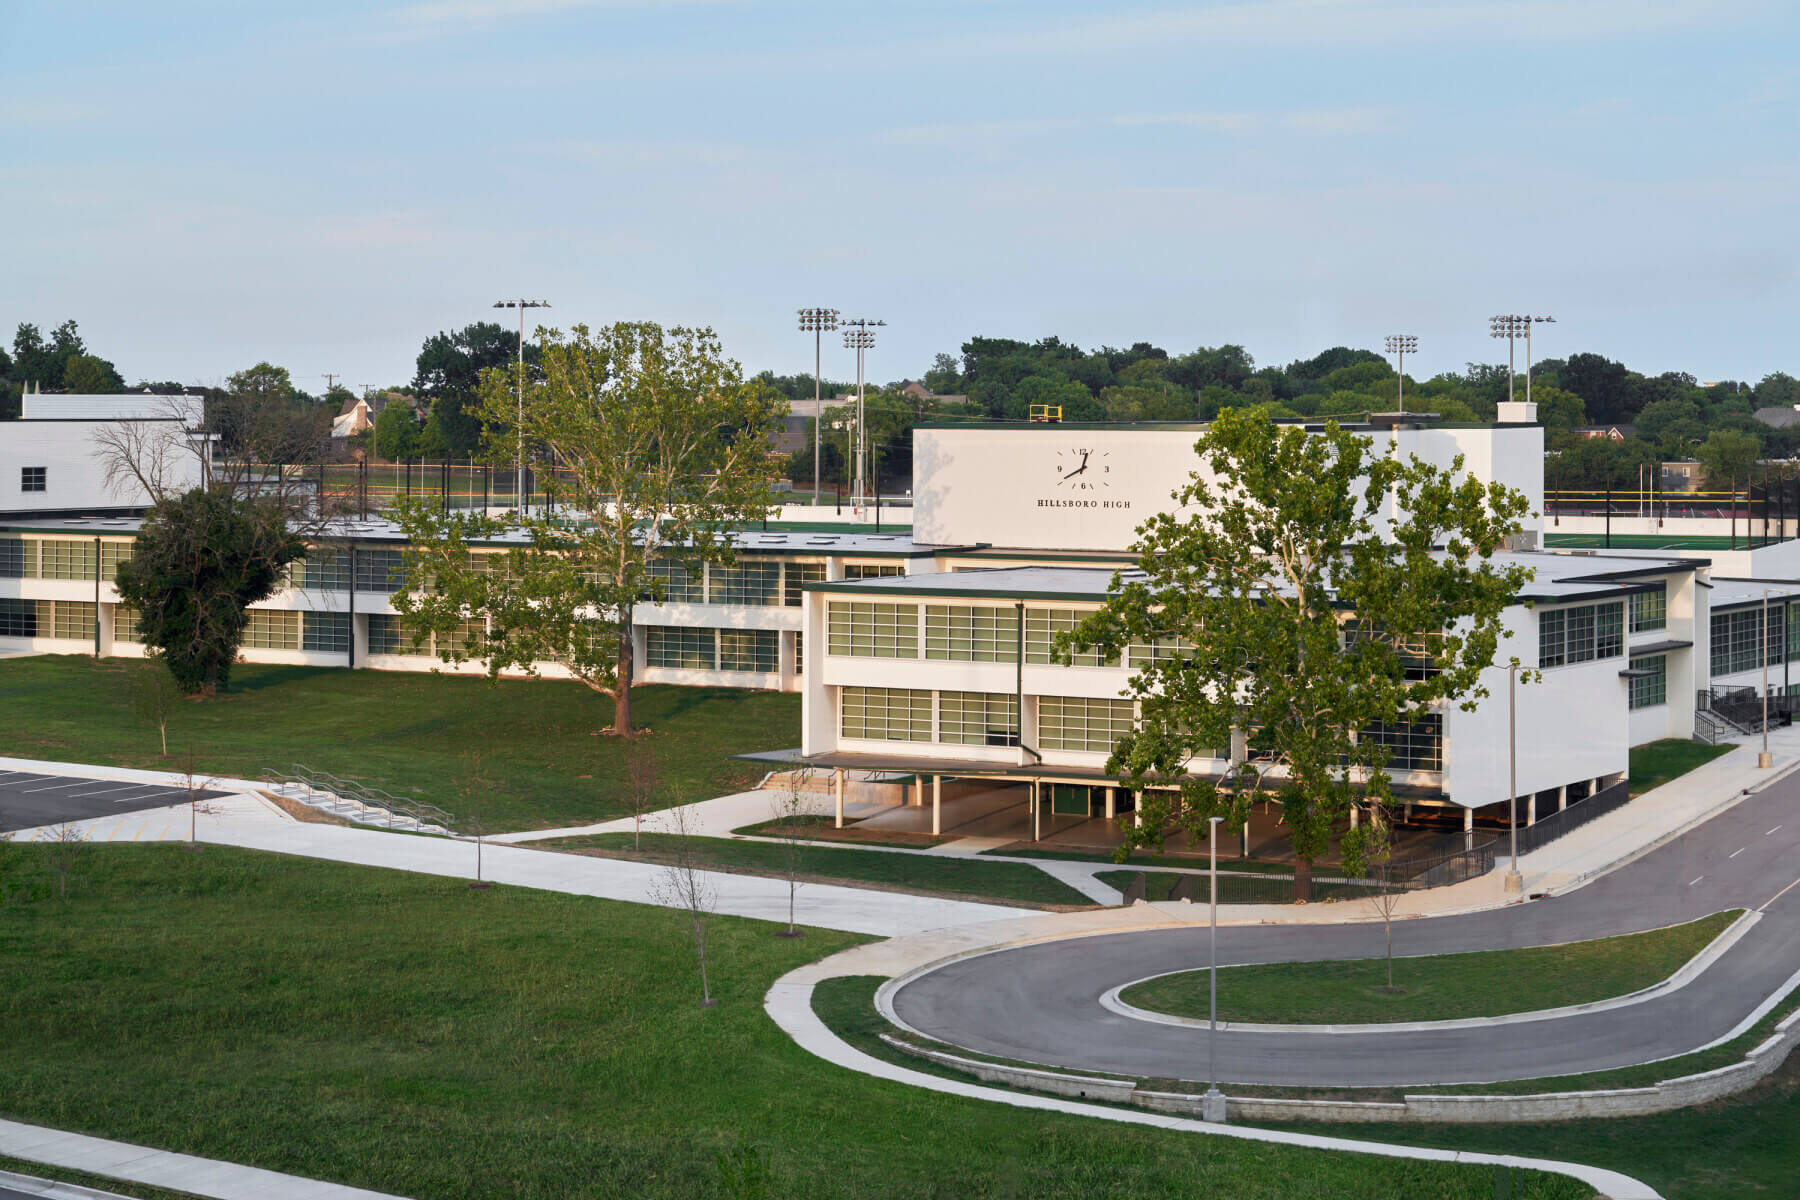 The outside of Hillsboro High School with trees and grass surrounding